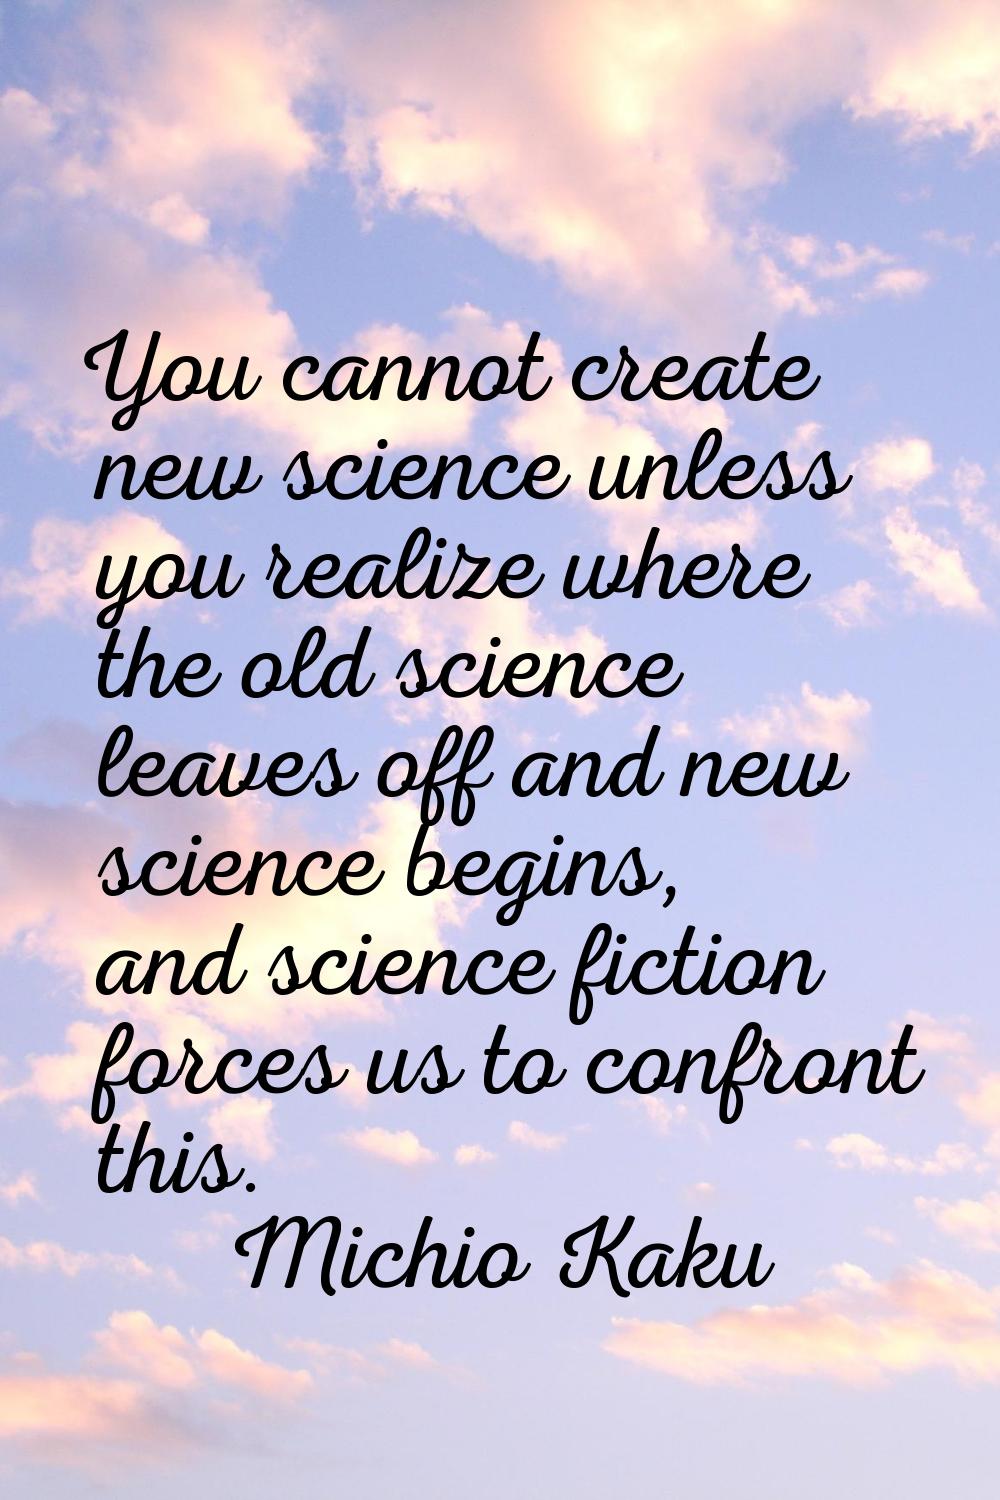 You cannot create new science unless you realize where the old science leaves off and new science b